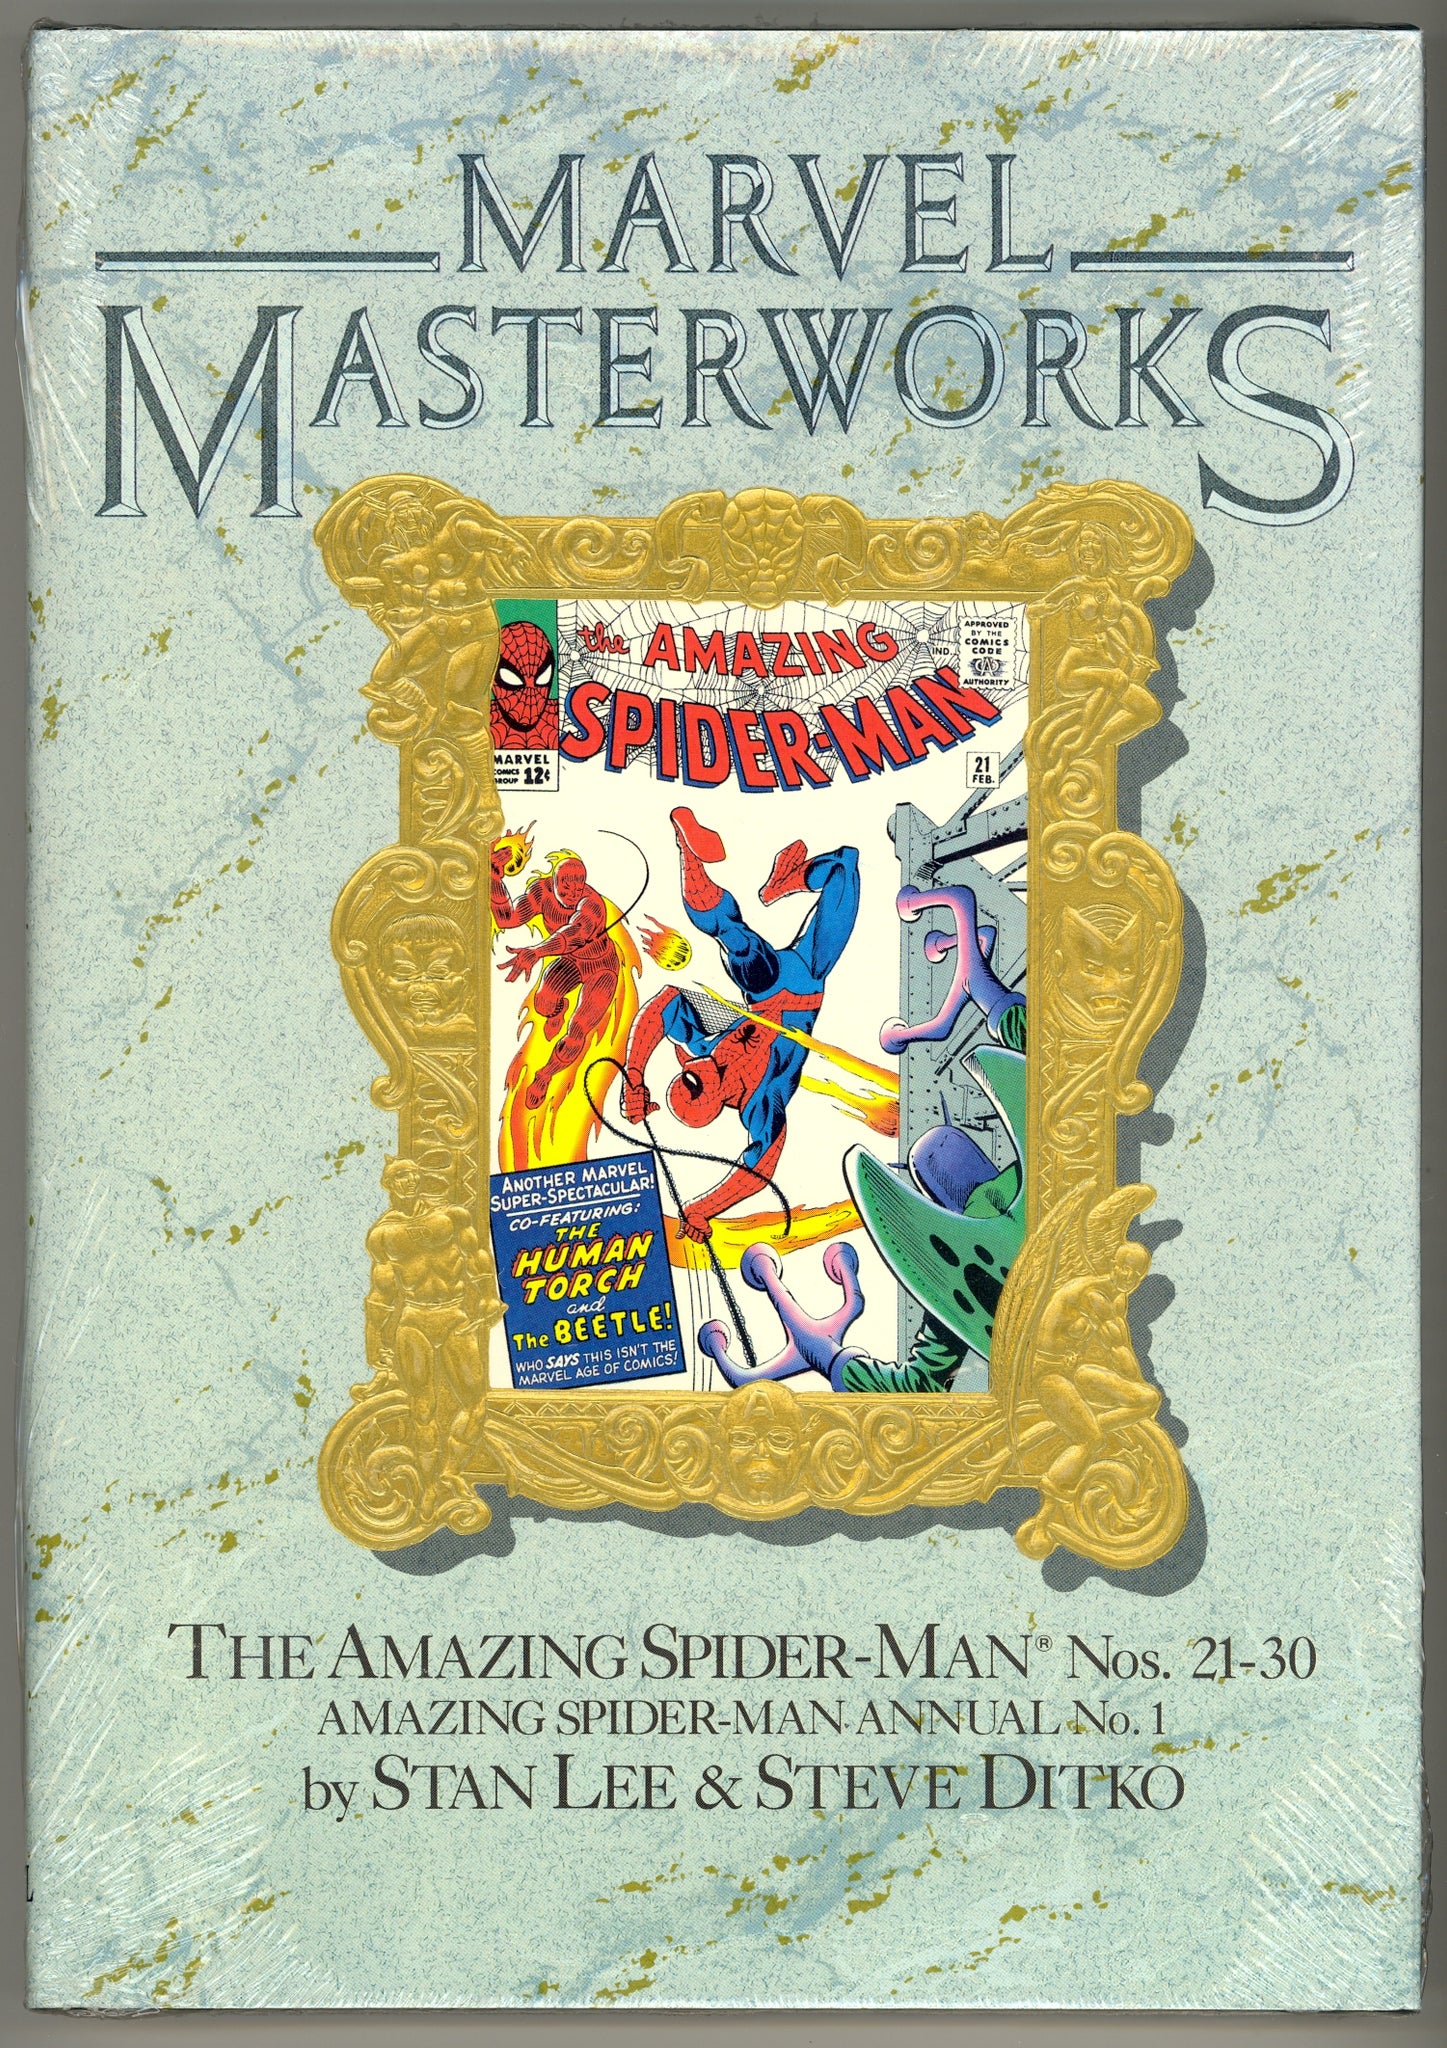 Marvel Masterworks volume 10 Amazing Spider-Man issues #21-30 and Annual #1